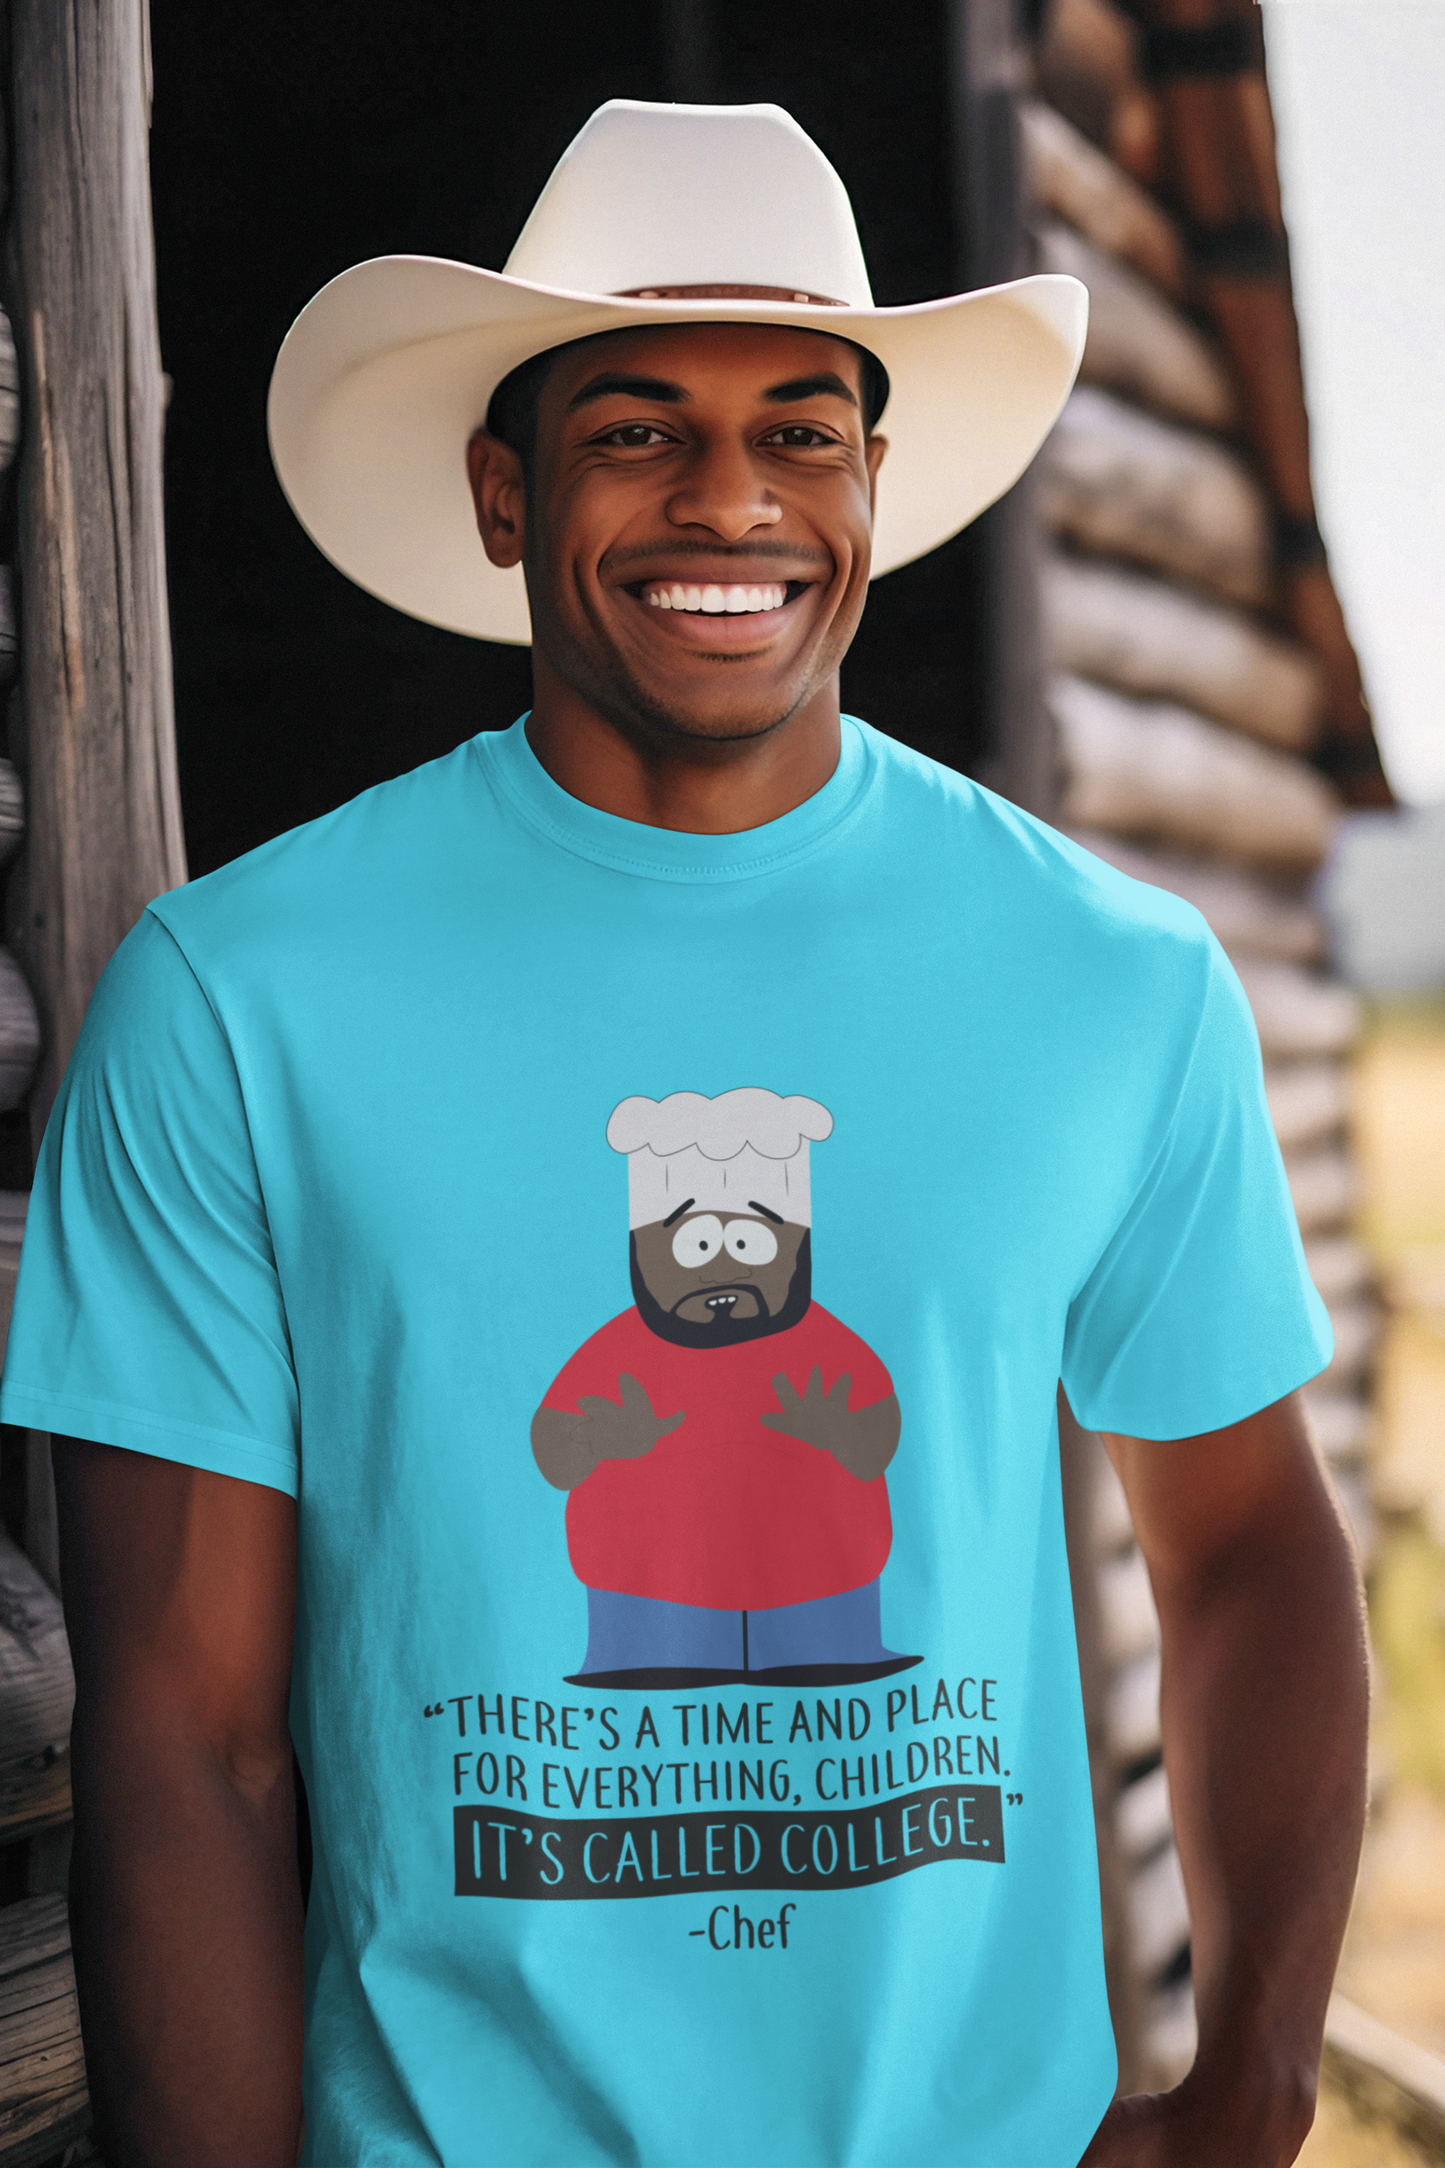 "THERE'S A TIME AND PLACE FOR EVERYTHING" - Chef, South Park | Unisex T-Shirt